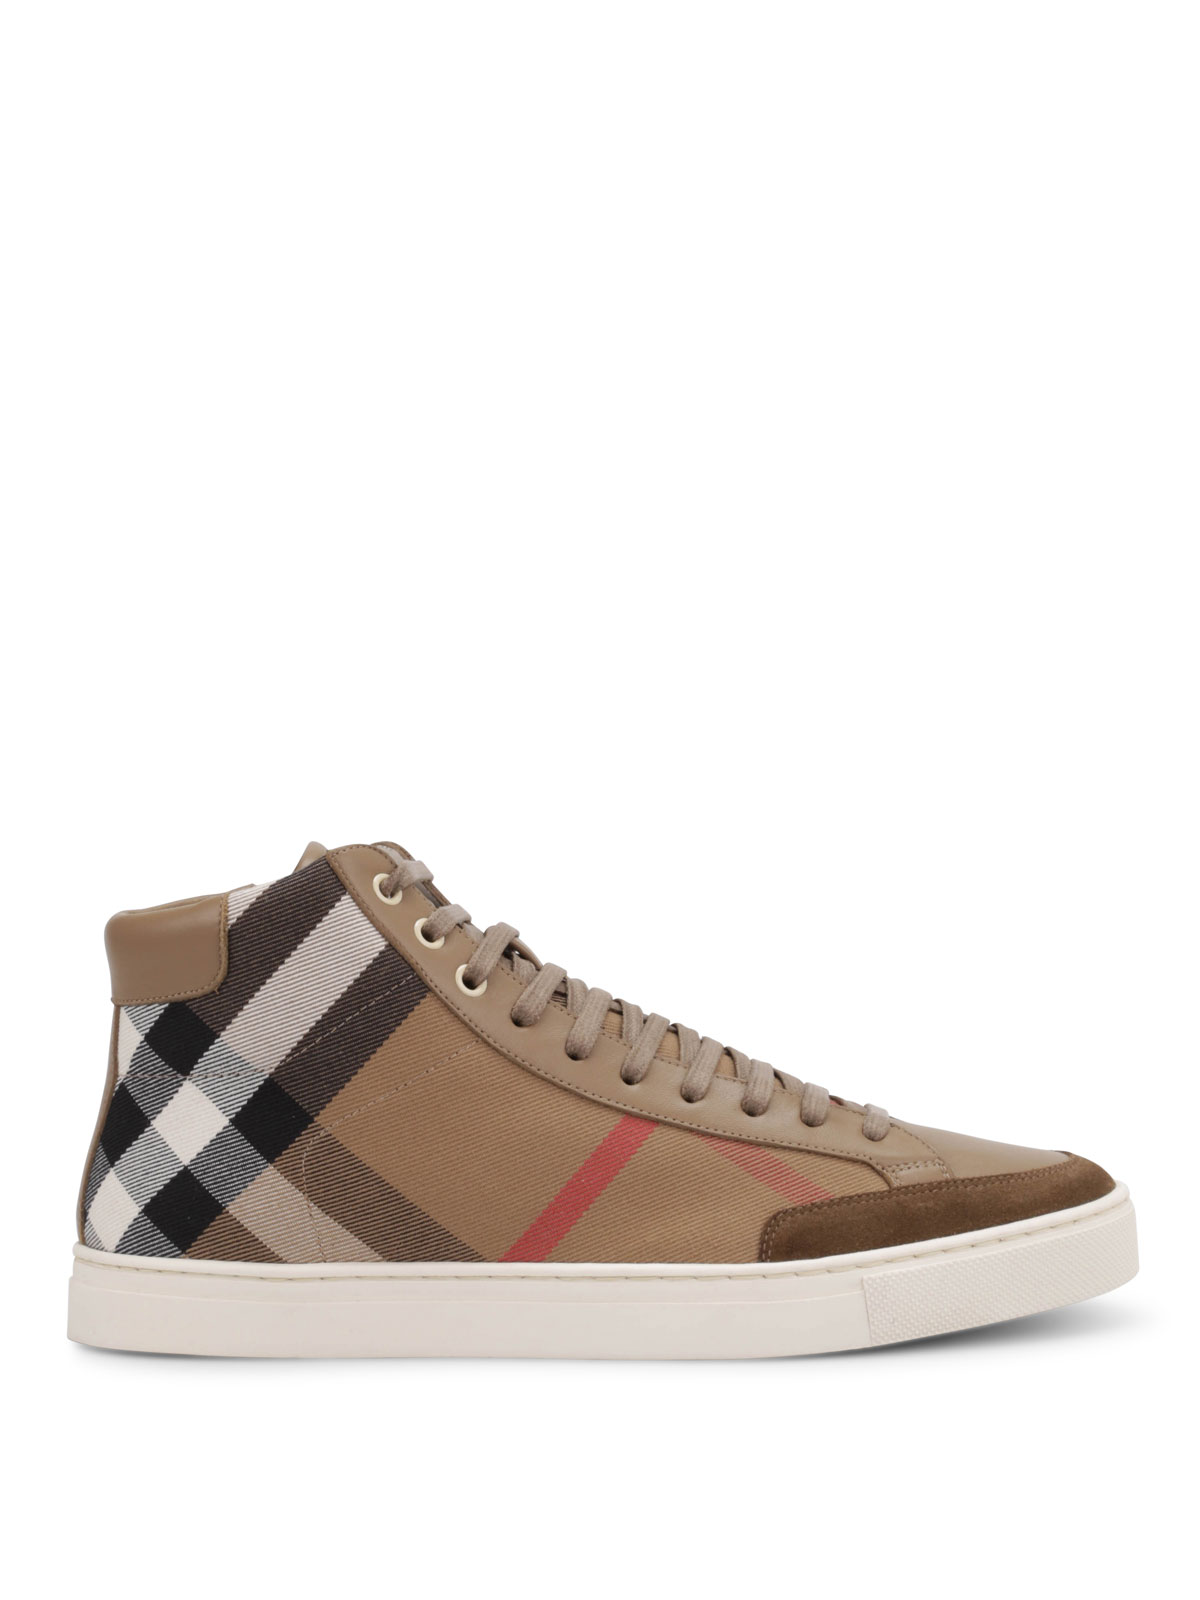 Burberry Shoes Sale In Sydney | IUCN Water